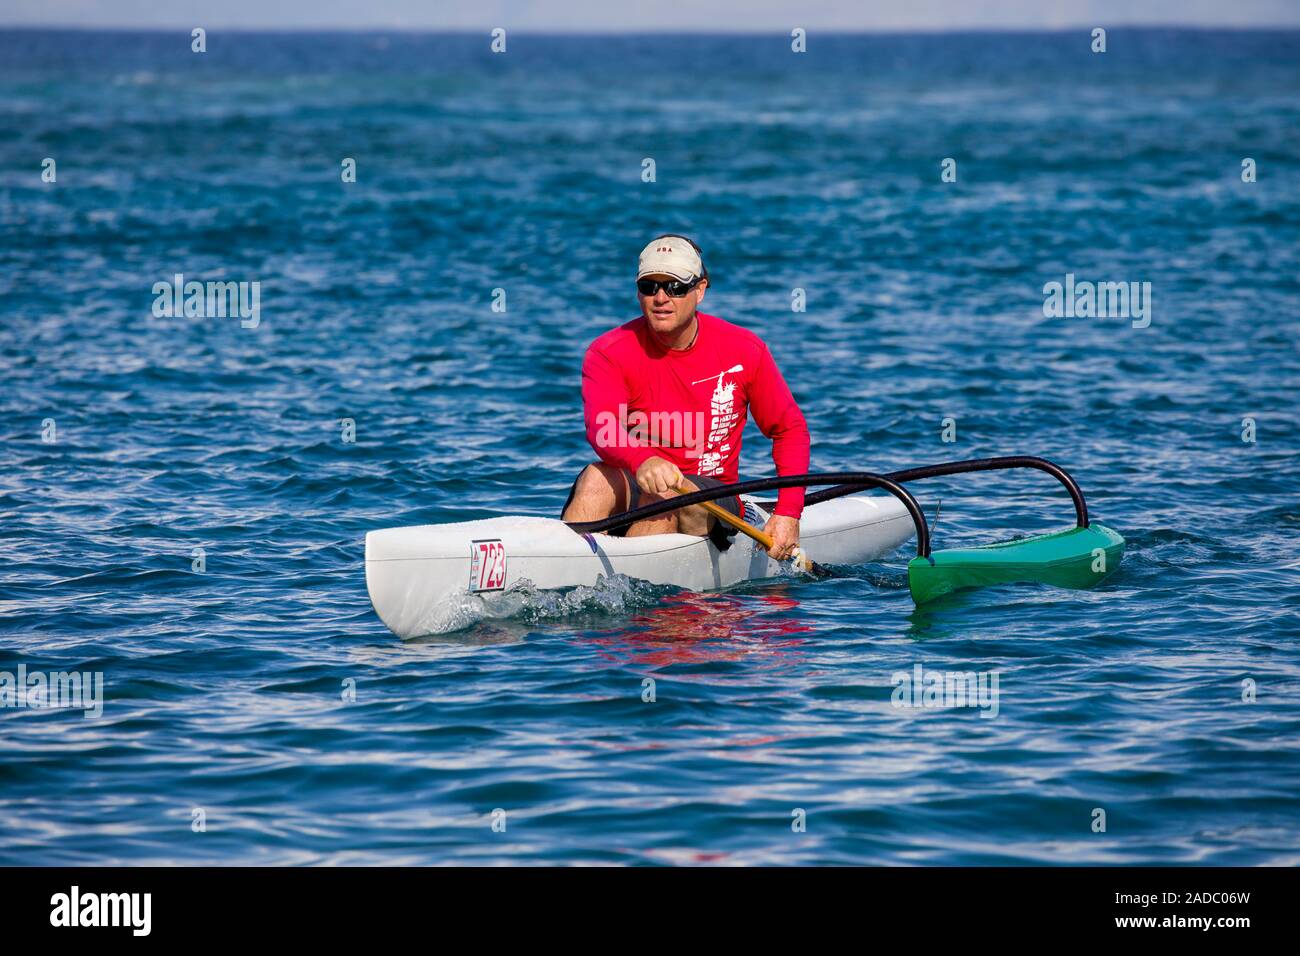 Man paddling a one-person outrigger canoe off the island of Maui, Hawaii. Image is model released. Stock Photo